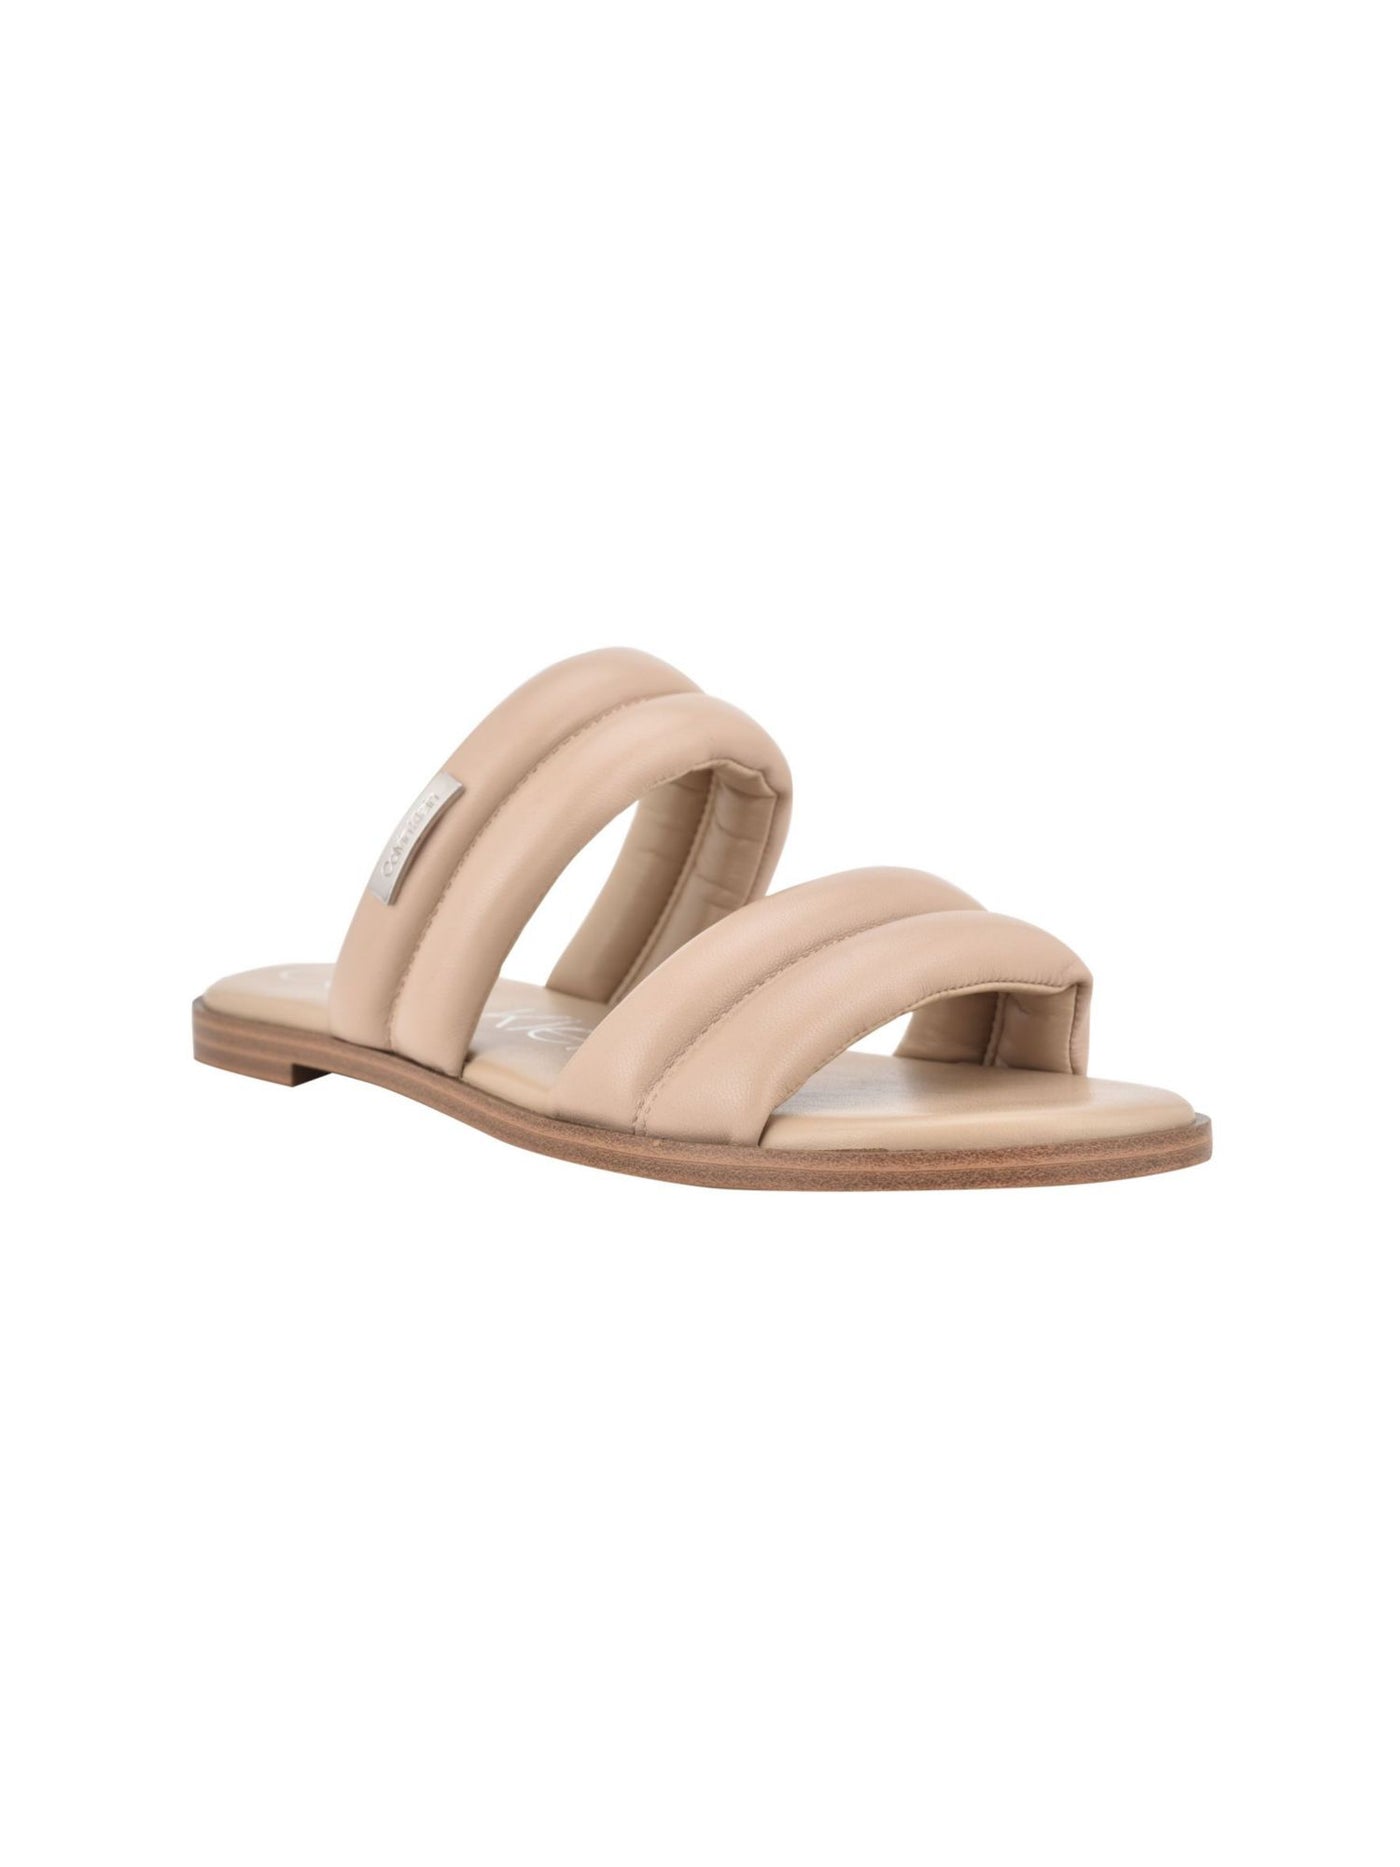 CALVIN KLEIN Womens Light Natural Beige Puffy Double Band Logo Plate Padded Koko Round Toe Slip On Leather Slide Sandals Shoes 7.5 M